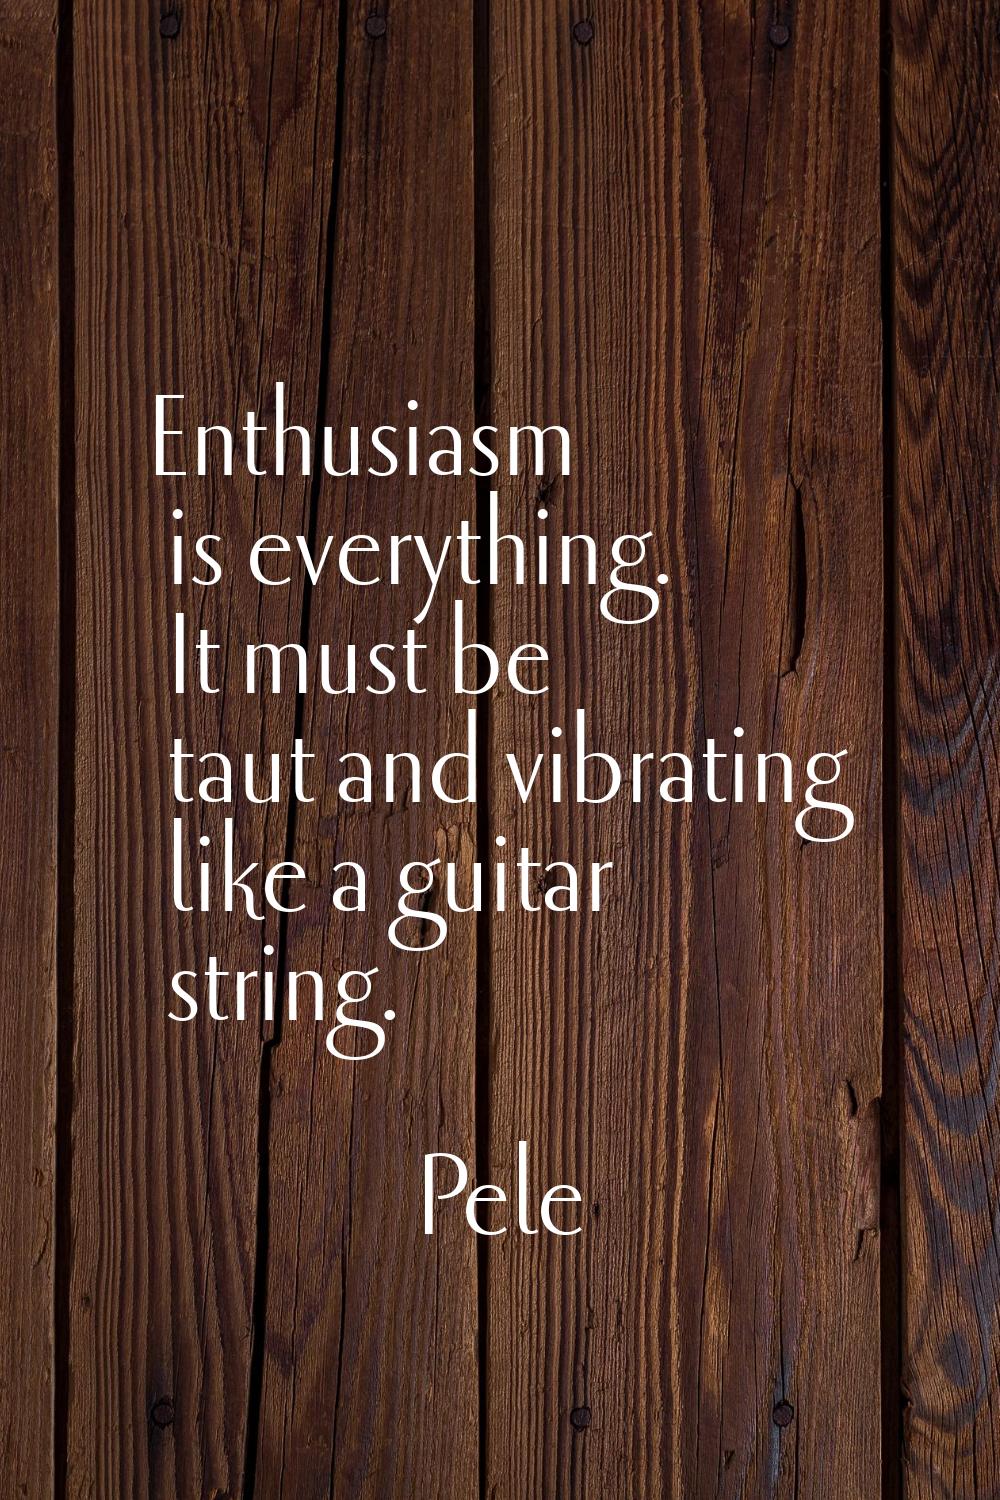 Enthusiasm is everything. It must be taut and vibrating like a guitar string.